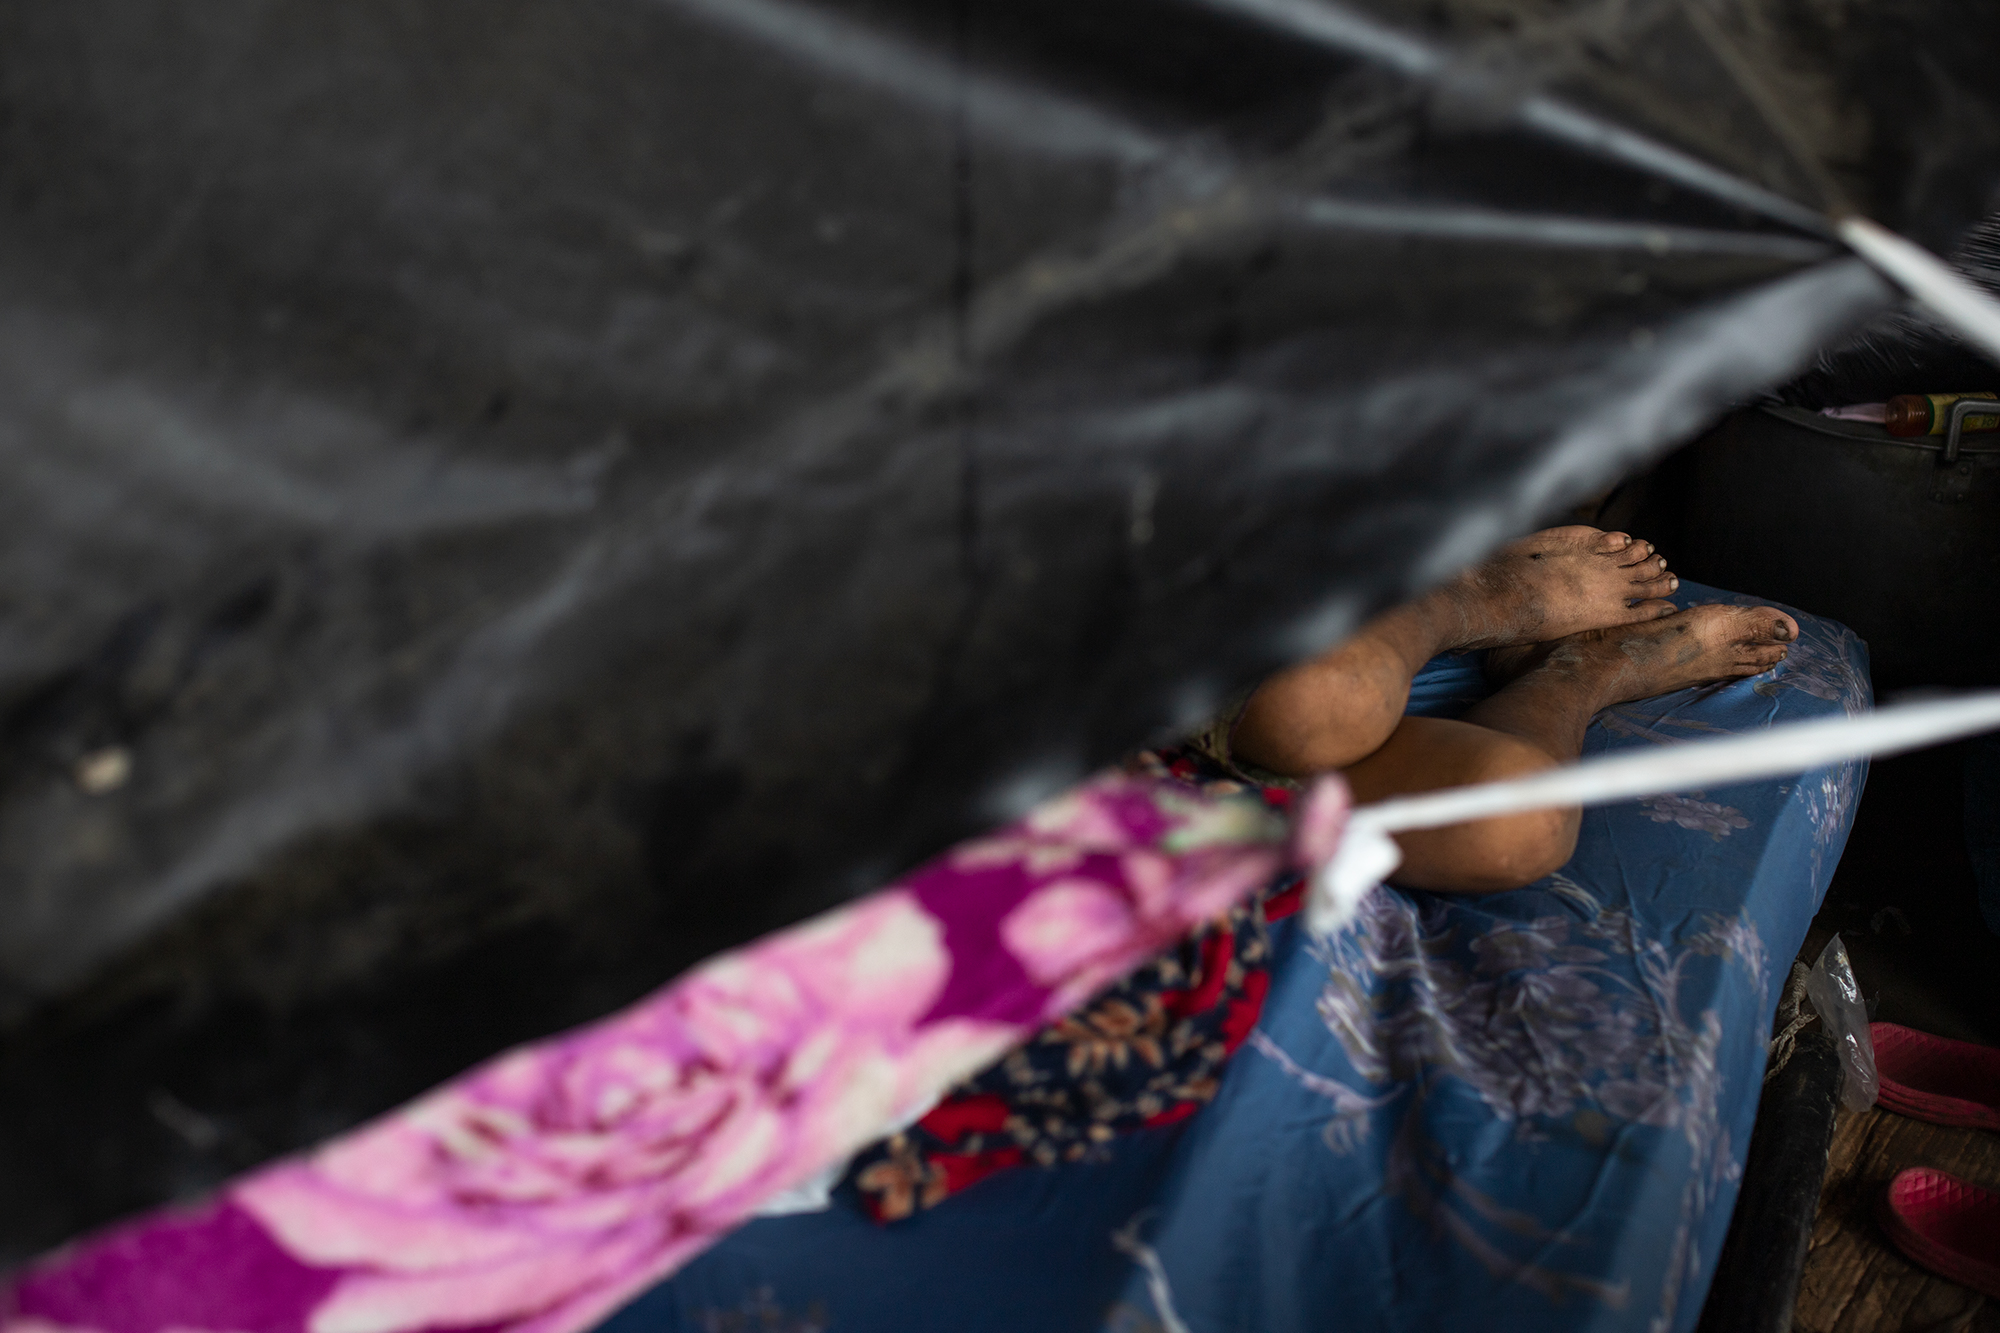 An old woman rests on a mattress inside a refuge constructed with plastic and pieces of wood underneath a bridge facing Chamelecón. San Pedro Sula, Nov. 21, 2020. Photo: Martín Cálix.